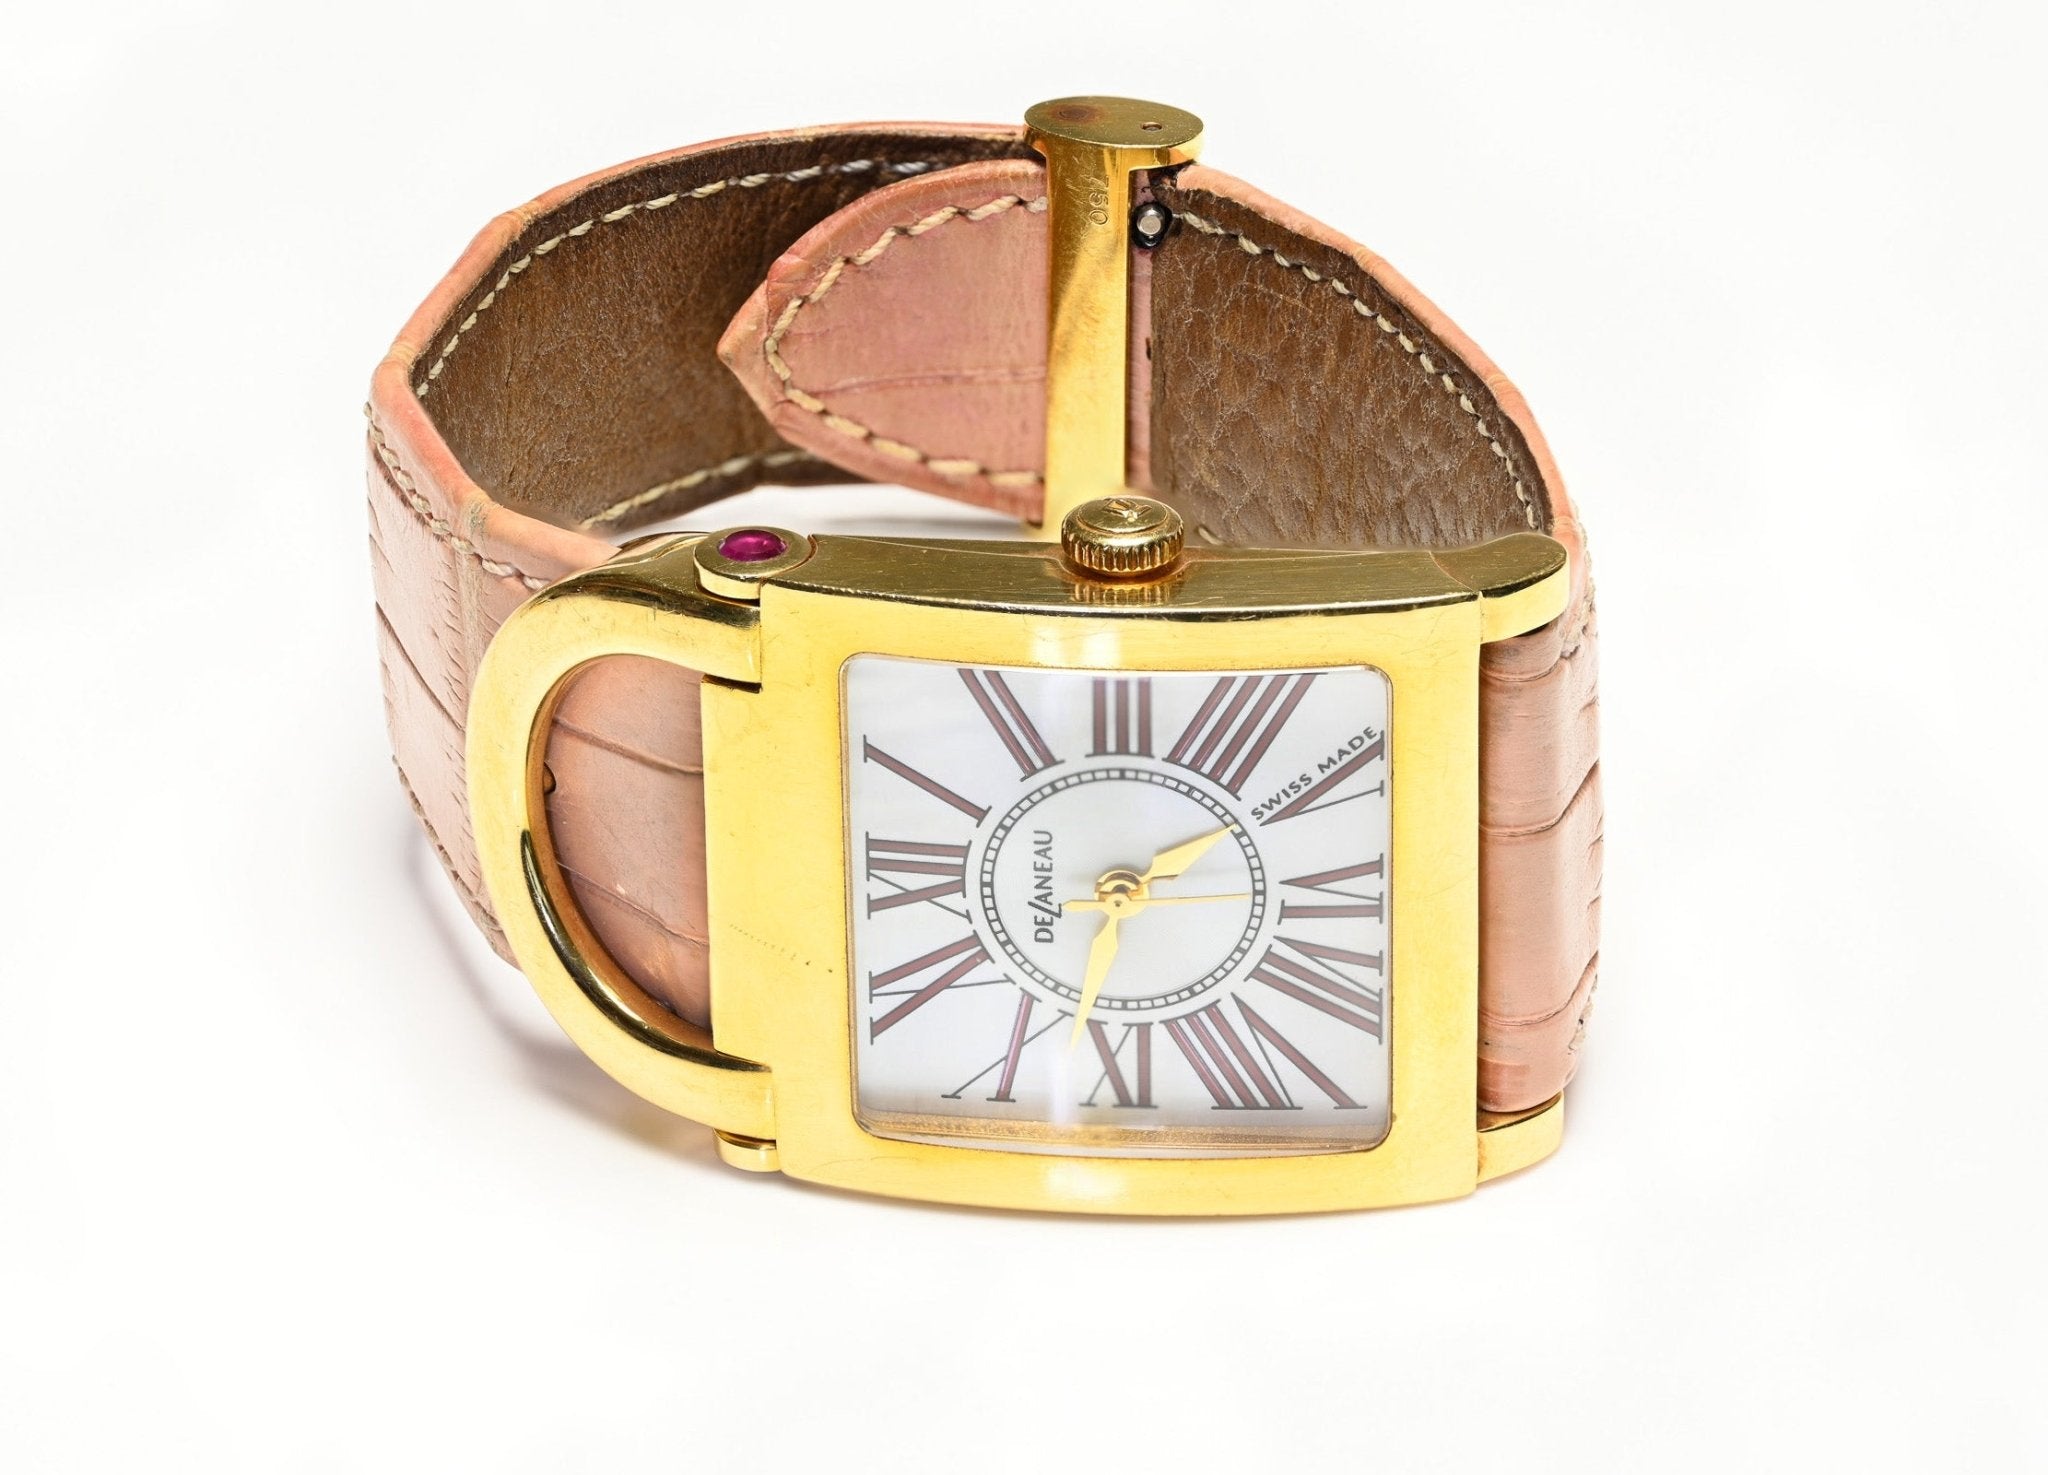 Delaneau 18K Yellow Gold Ladies Watch - DSF Antique Jewelry